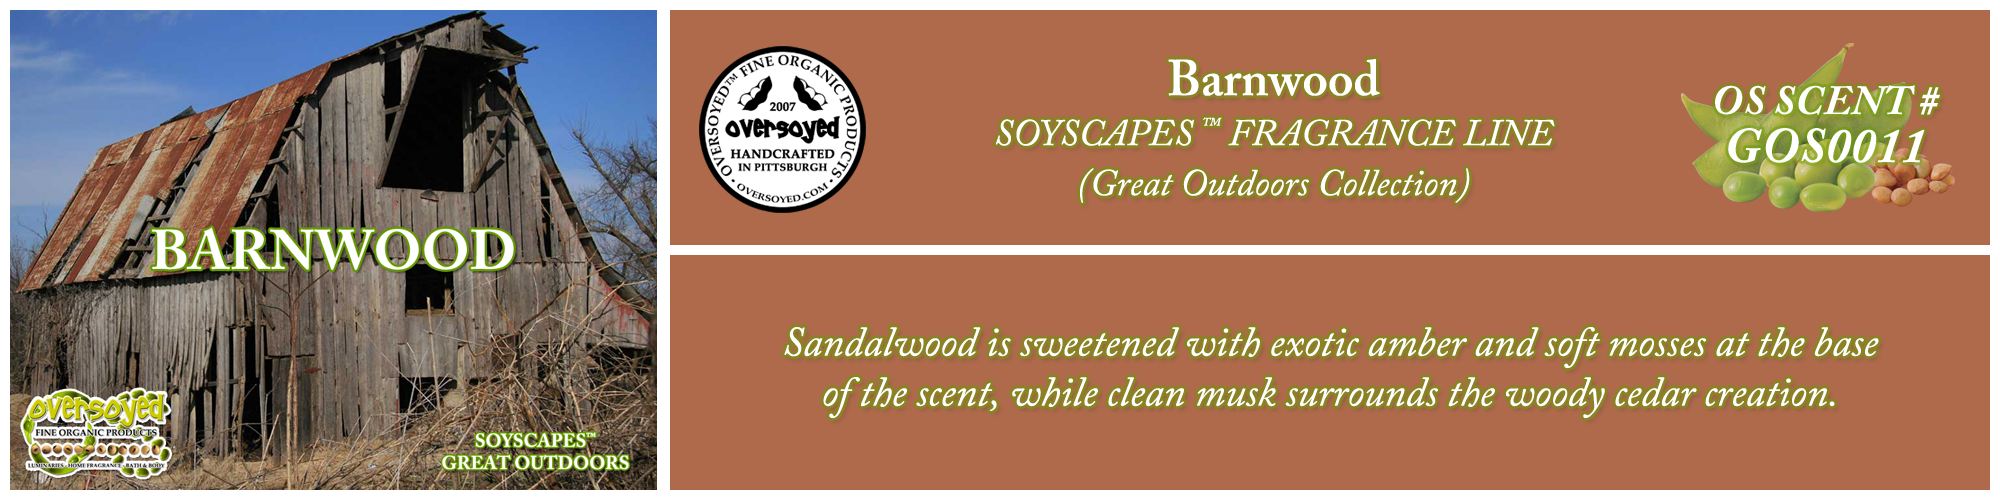 Barnwood Handcrafted Products Collection